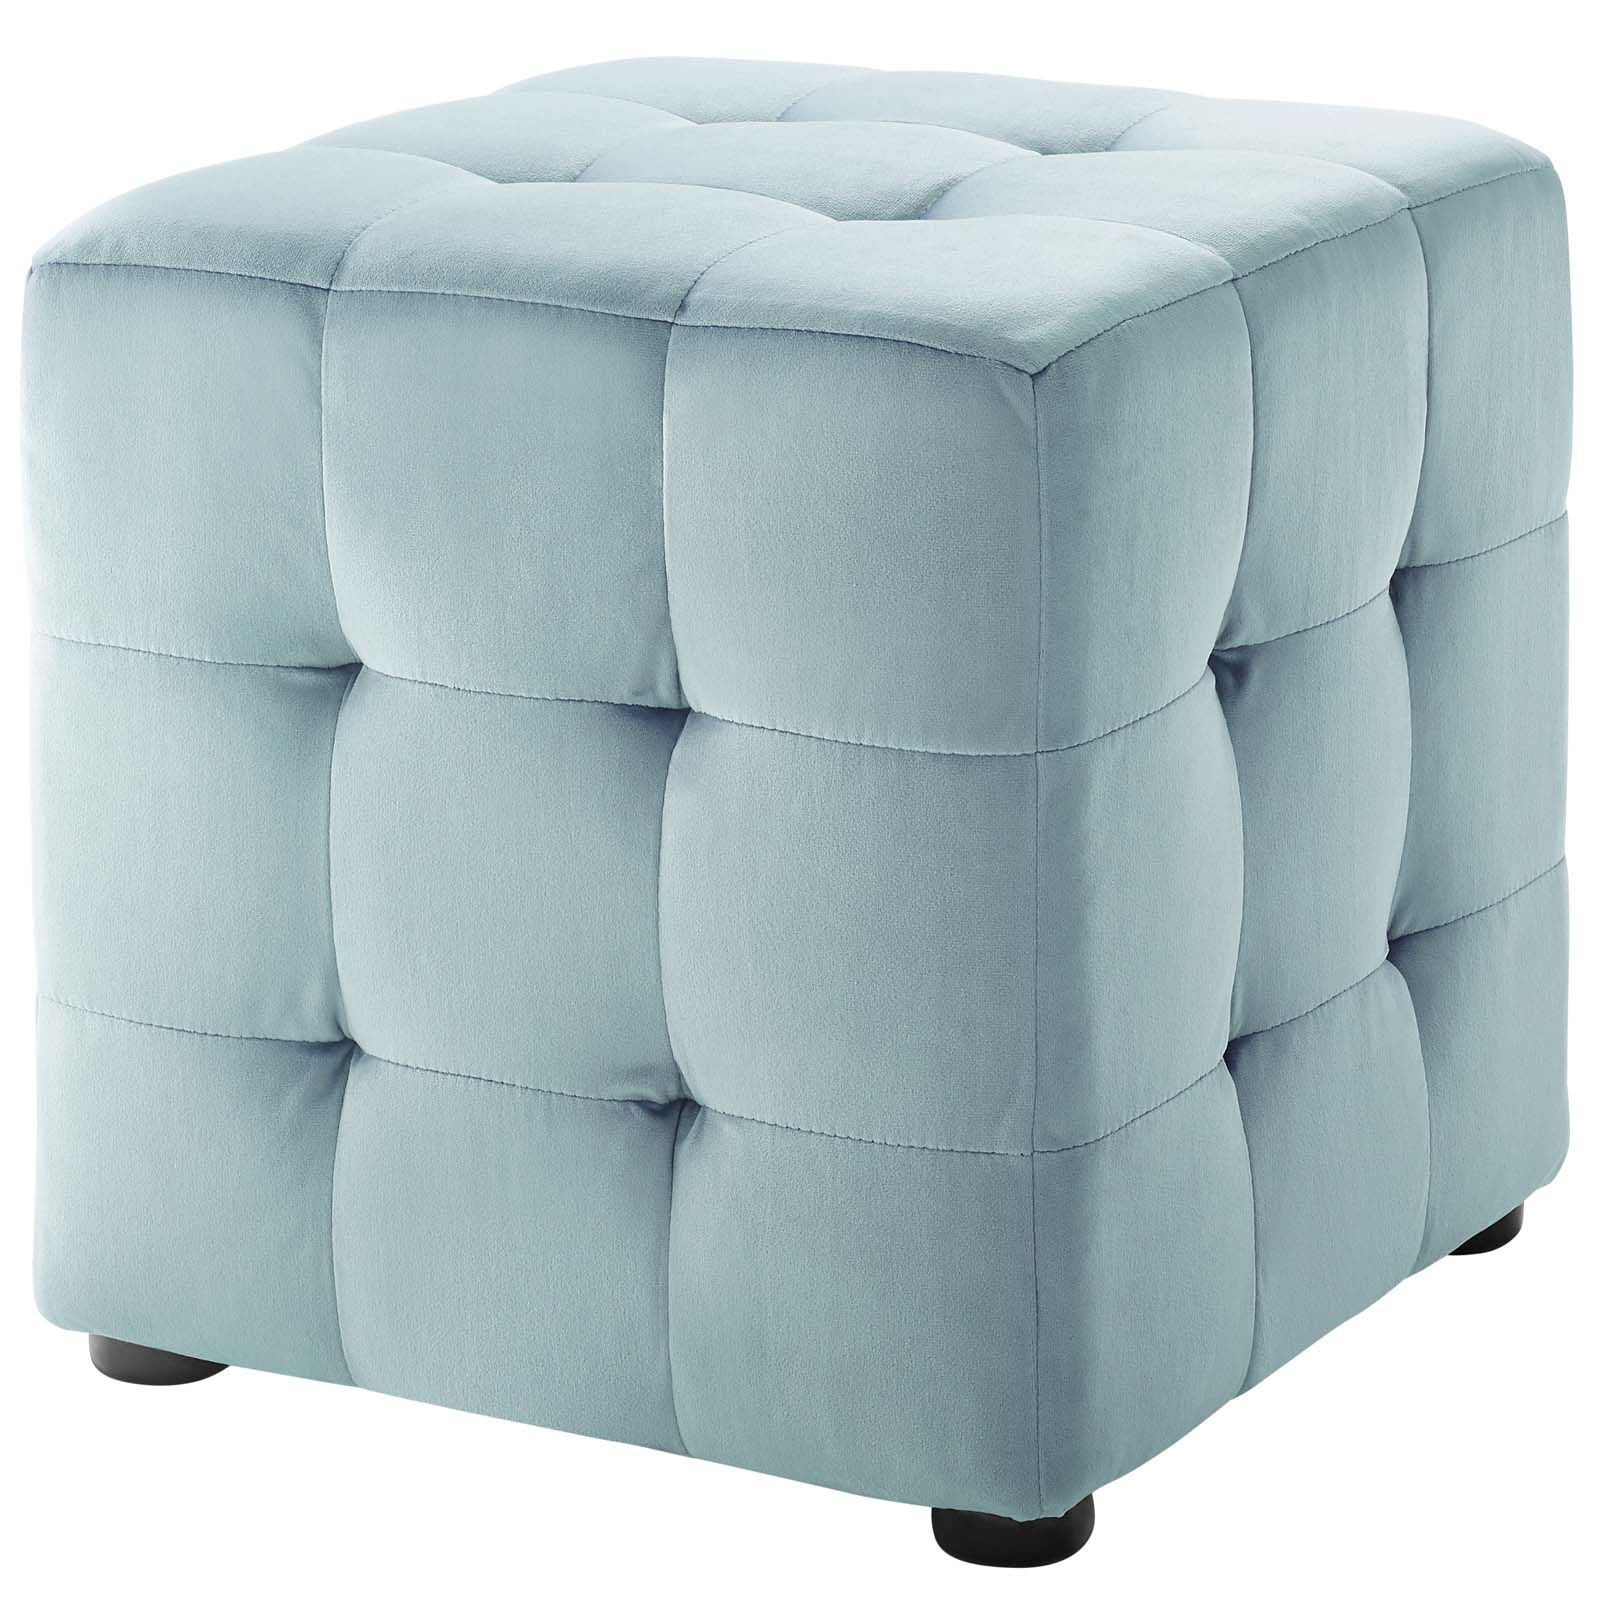 Fashionable Cream Fabric Tufted Oval Ottomans Inside Contour Tufted Cube Performance Velvet Ottoman Light Blue (View 5 of 10)